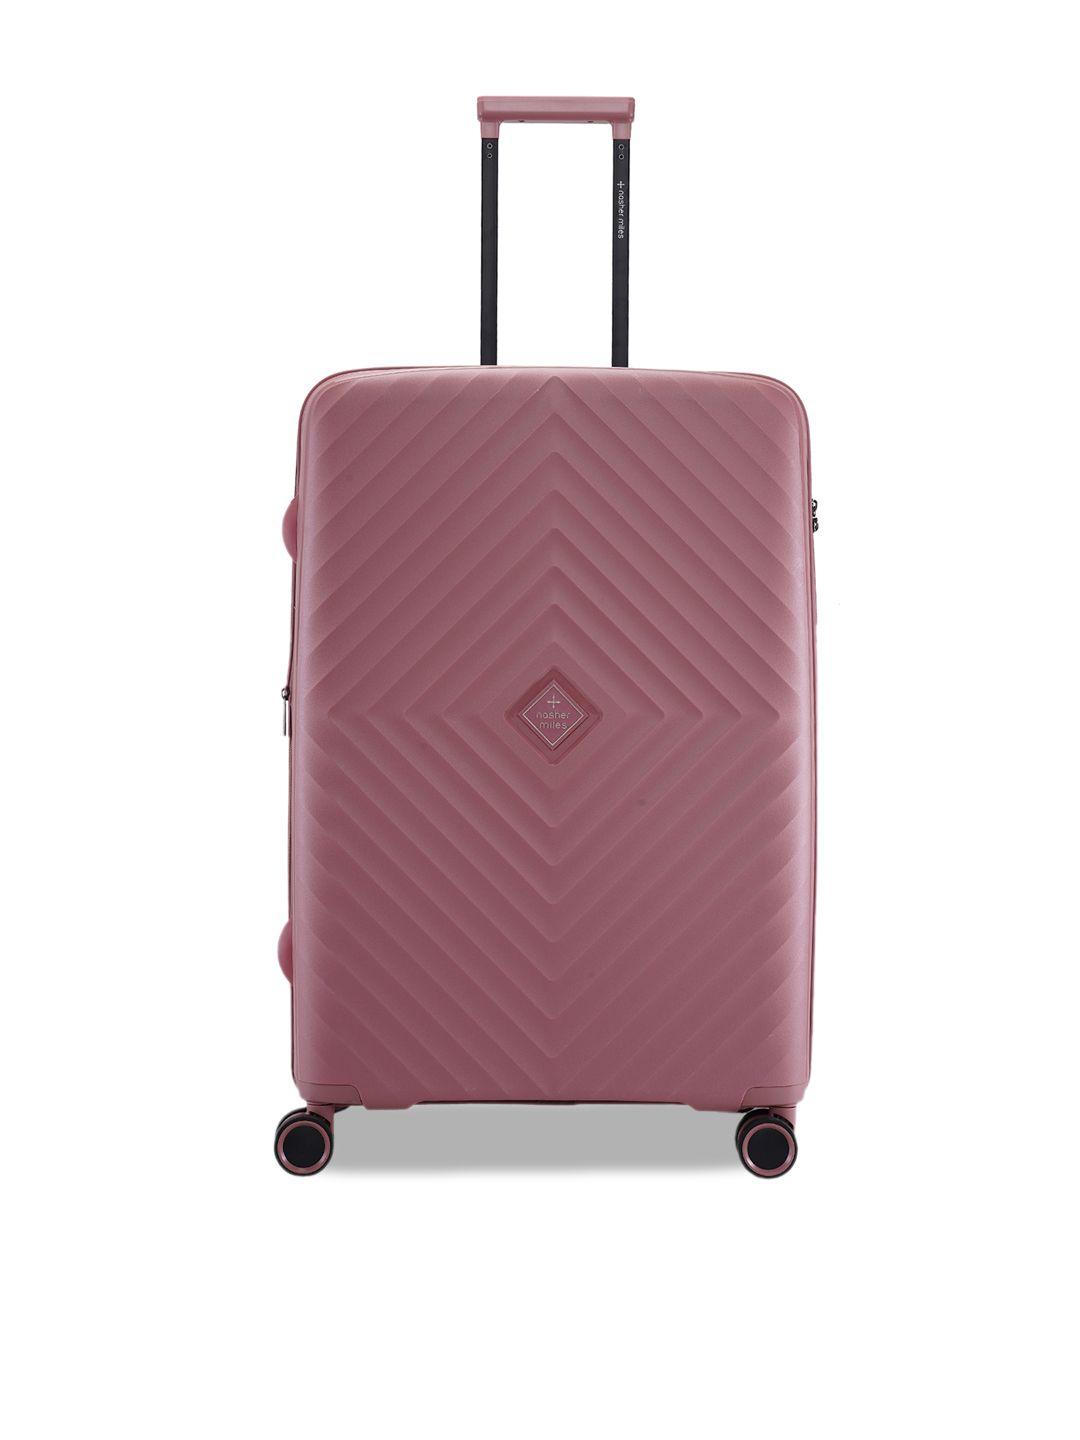 nasher miles hard-sided large textured trolley suitcase